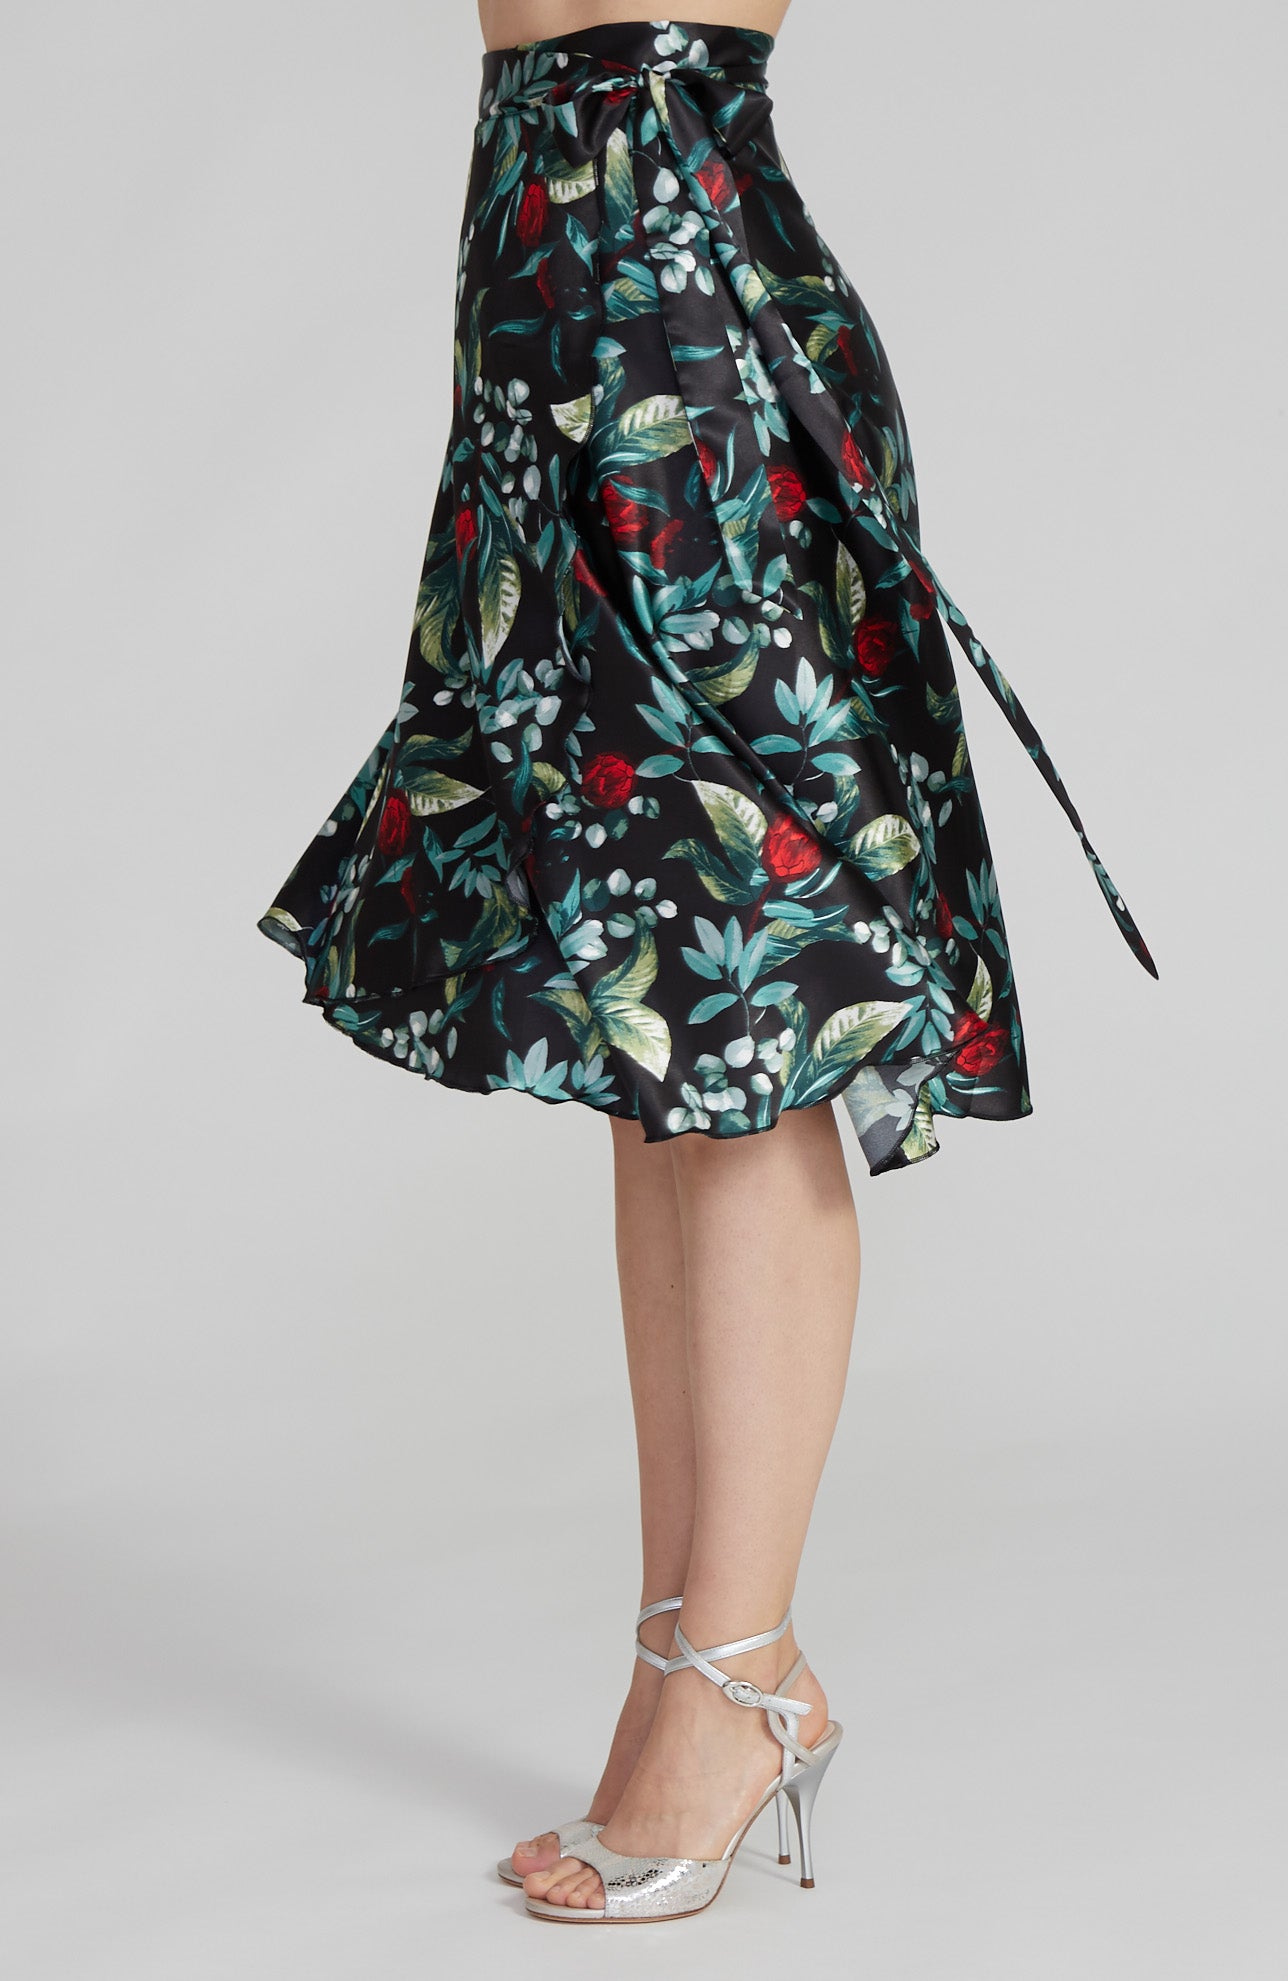 COCO - Wrap Skirt in Satin Florals